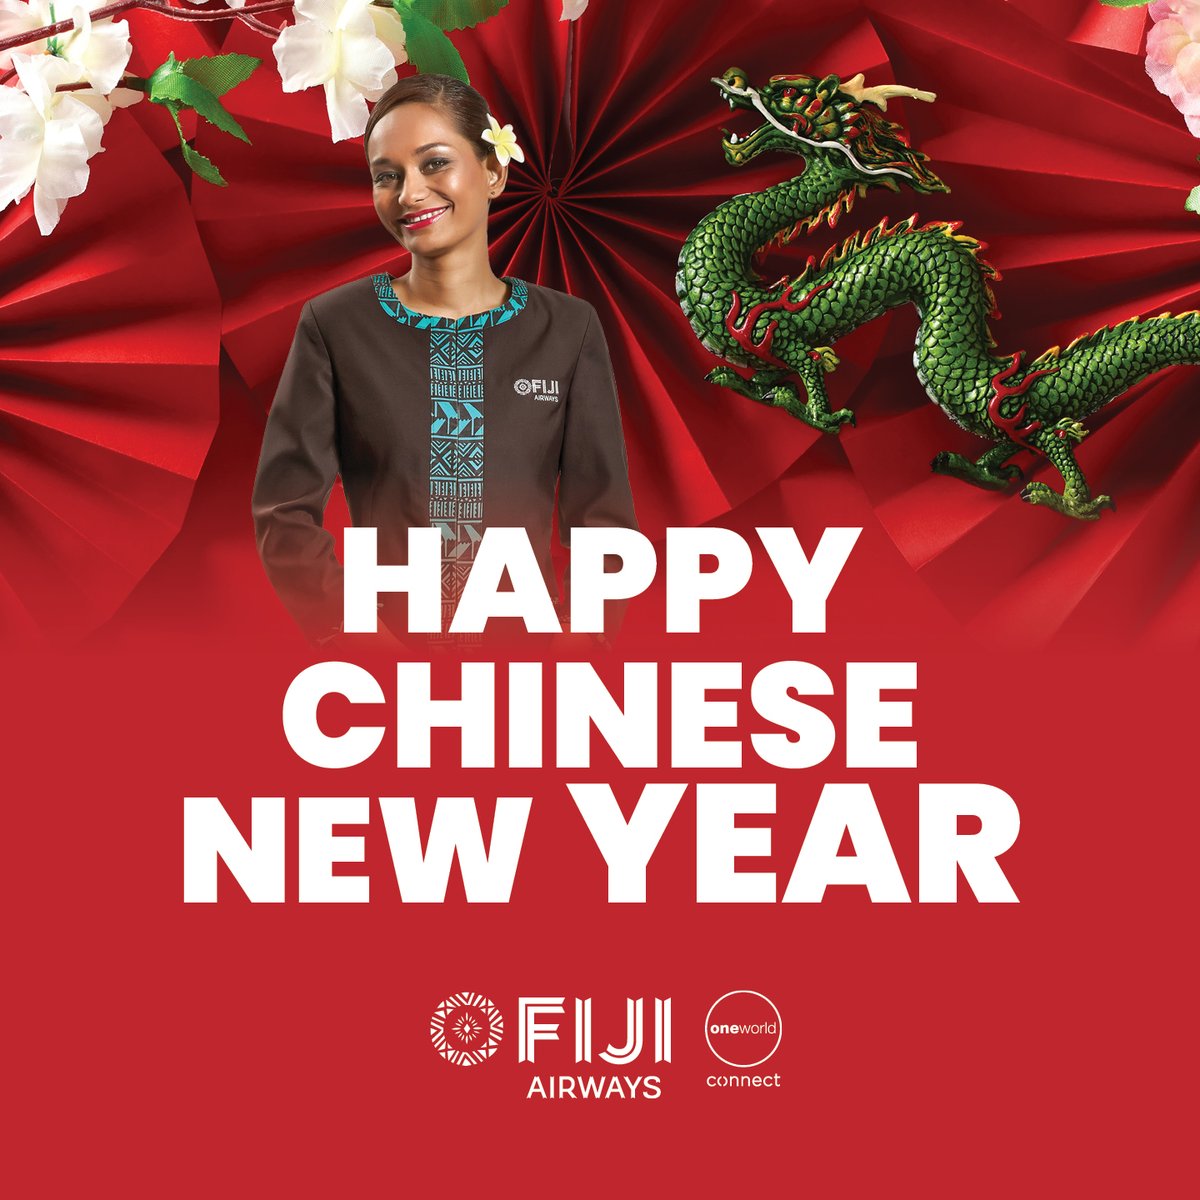 Wishing everyone a joyous Chinese New Year filled with prosperity, happiness, and good fortune from all of us at Fiji Airways! #chinesenewyear #yearofthedragon